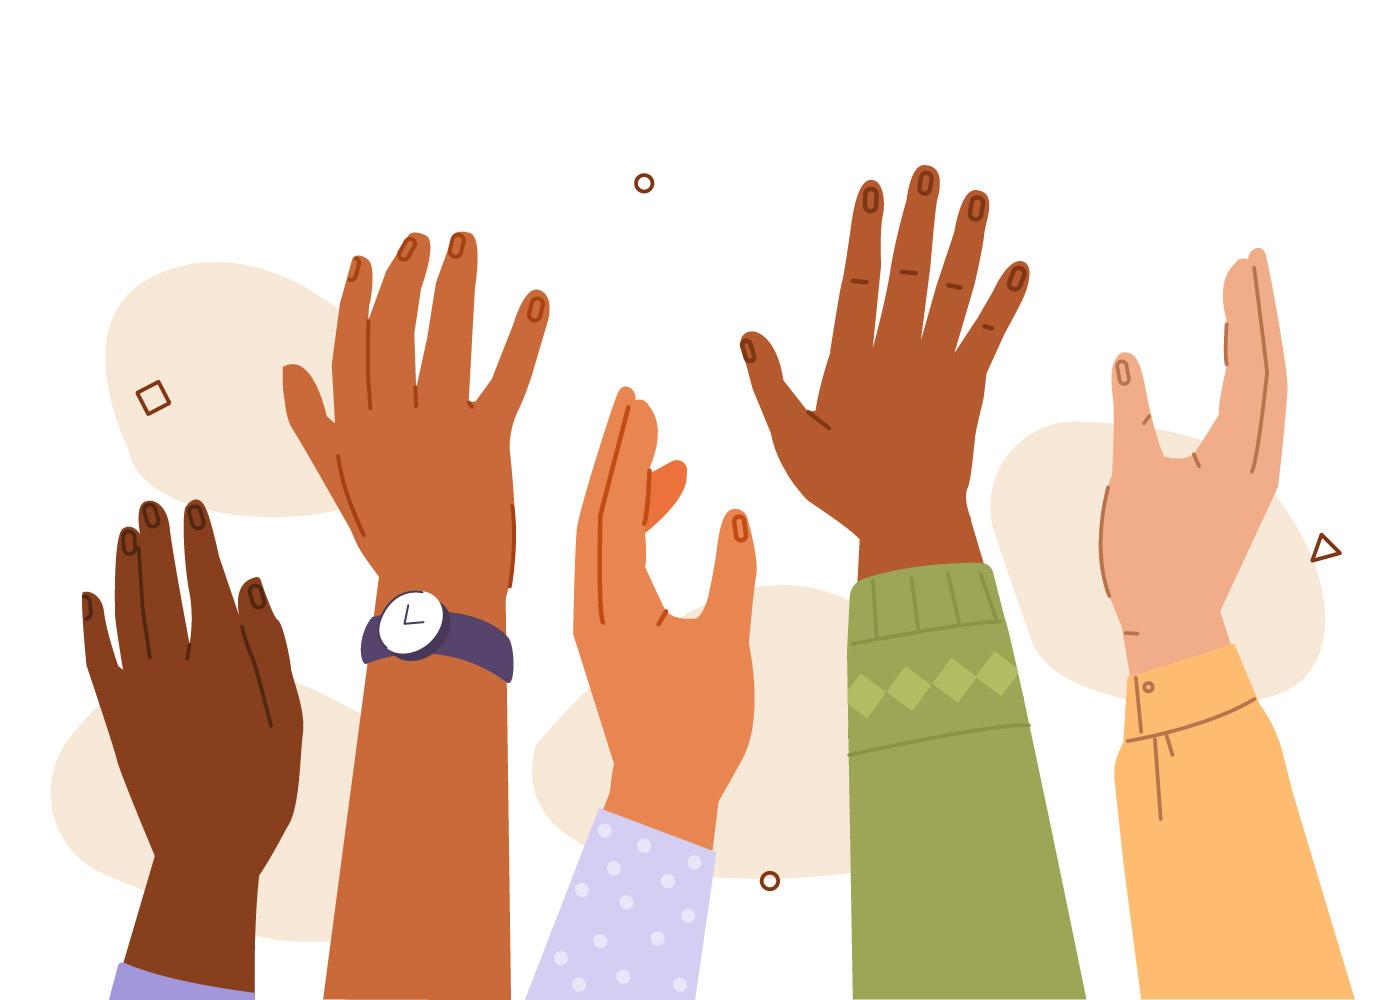 a vector illustration of hands of various skin tones reaching up in the air